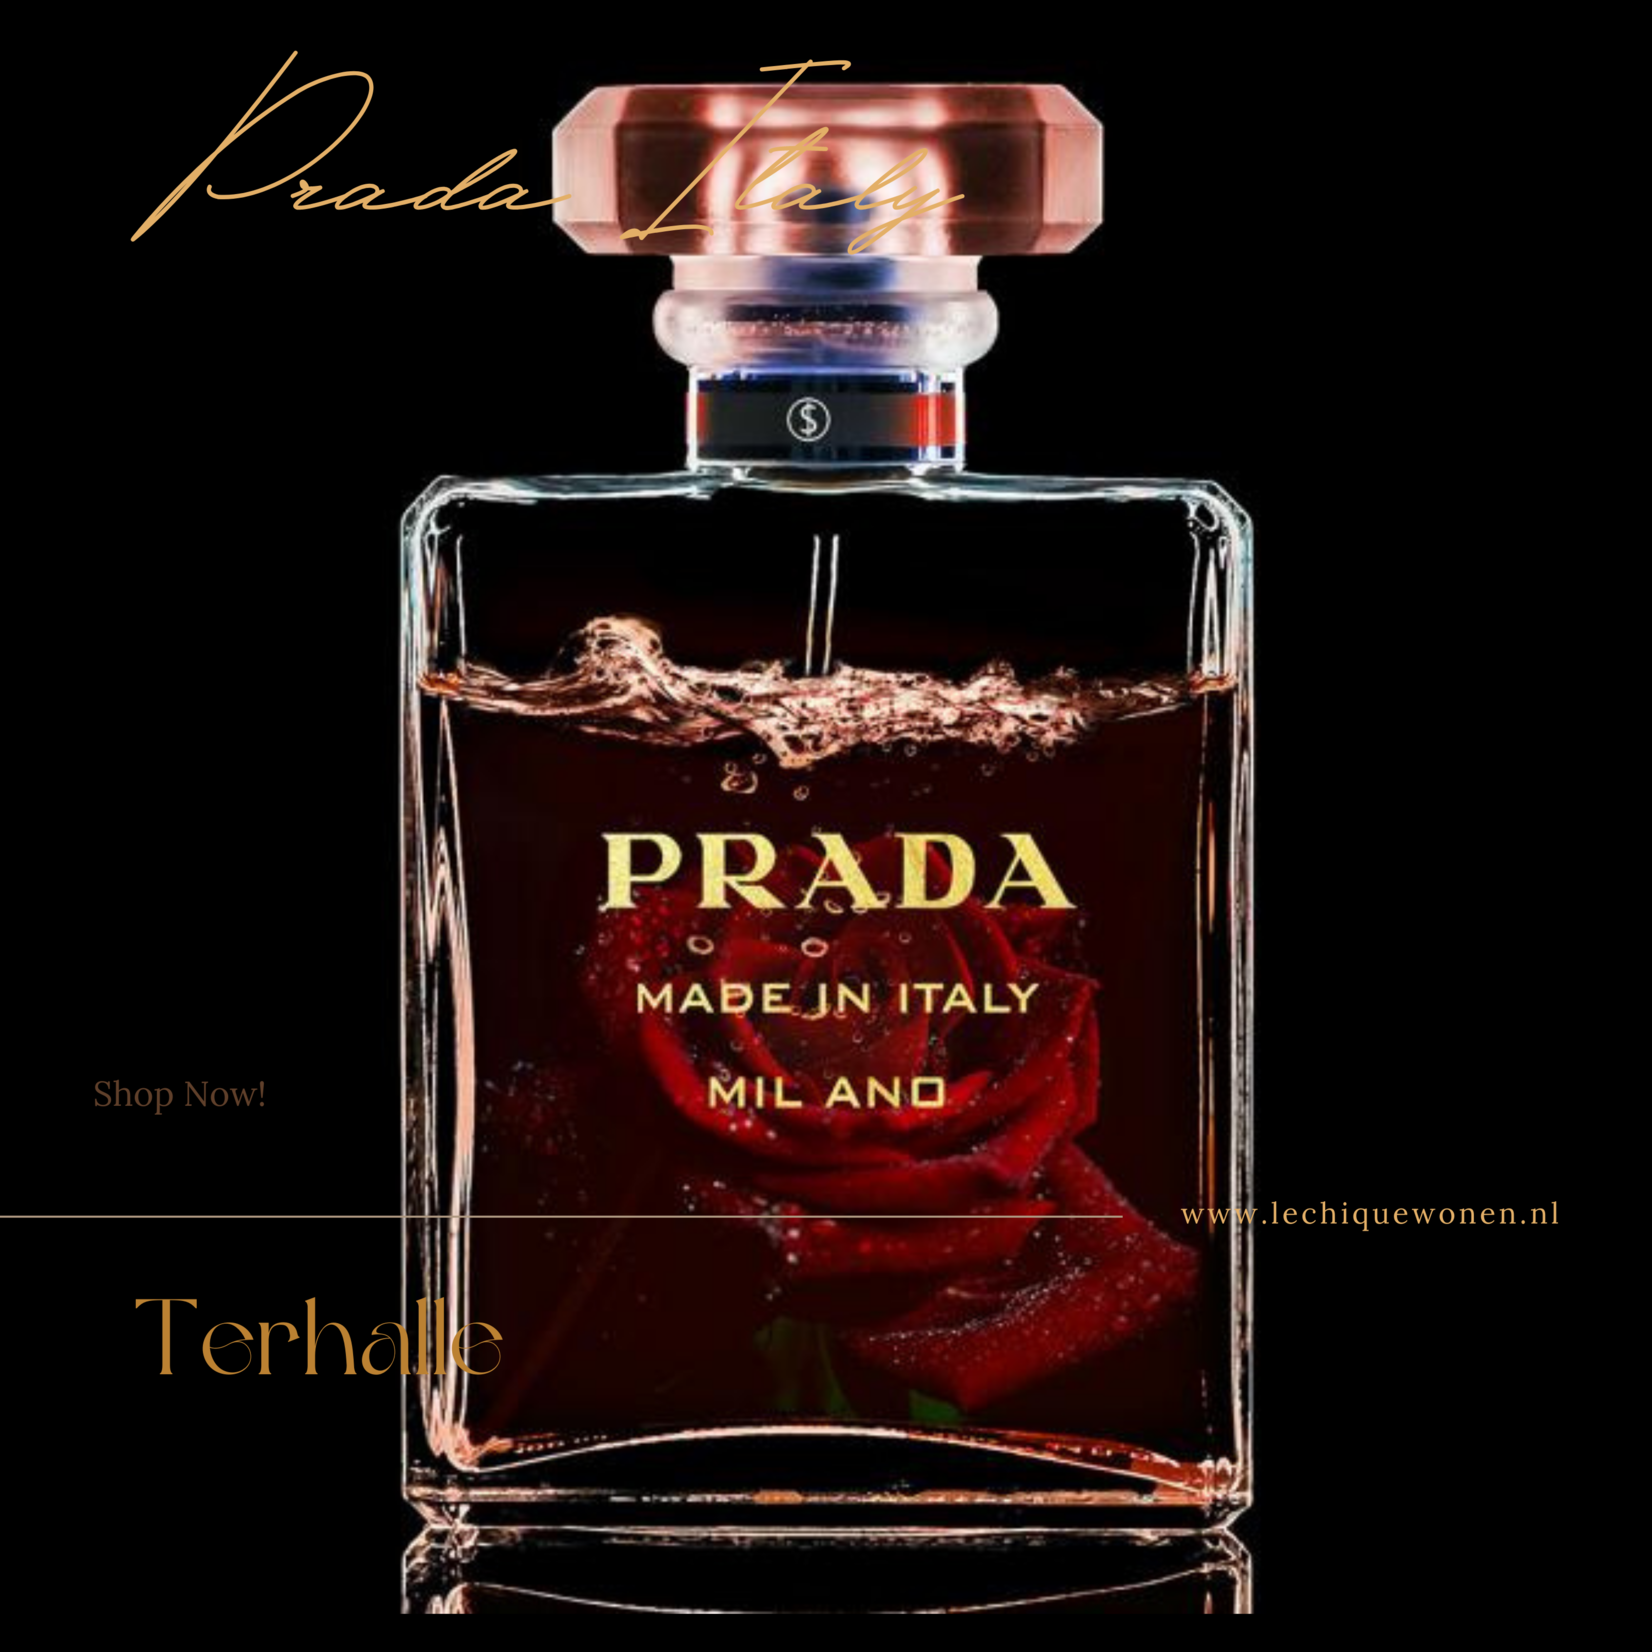 Ter Halle  Glass painting with gold foil  - Prada